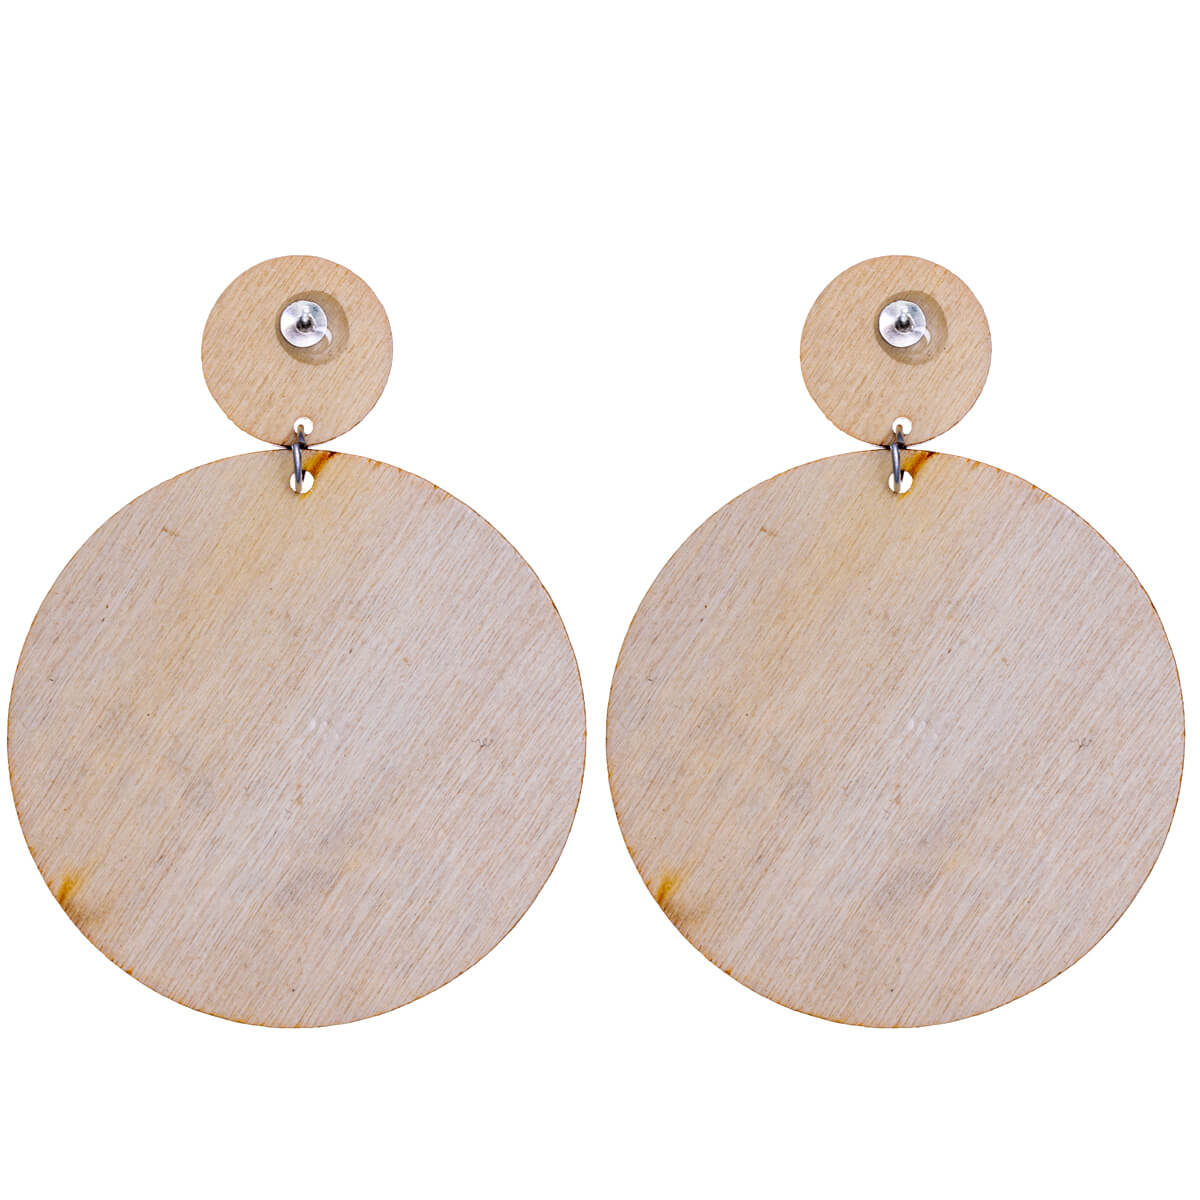 Wooden hanging earrings with fractal patterning